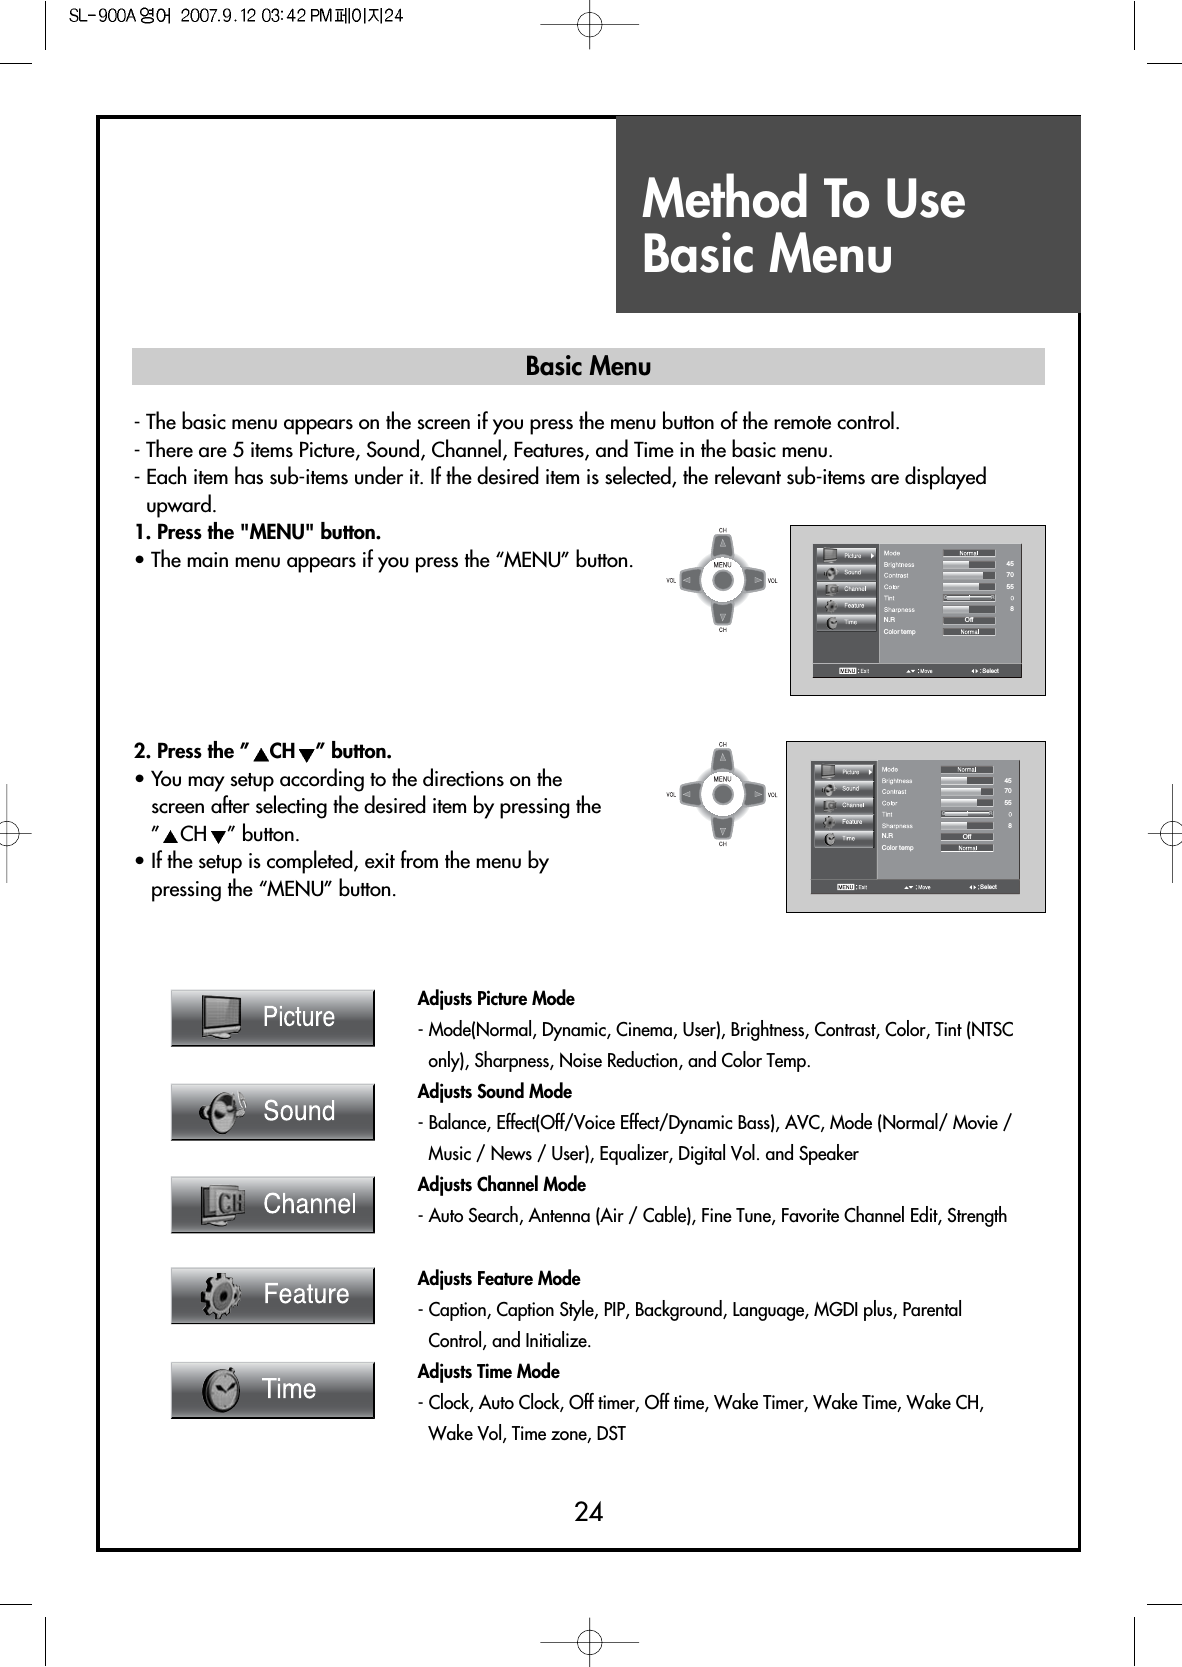 Method To UseBasic Menu24Adjusts Picture Mode- Mode(Normal, Dynamic, Cinema, User), Brightness, Contrast, Color, Tint (NTSConly), Sharpness, Noise Reduction, and Color Temp.Adjusts Sound Mode- Balance, Effect(Off/Voice Effect/Dynamic Bass), AVC, Mode (Normal/ Movie /Music / News / User), Equalizer, Digital Vol. and SpeakerAdjusts Channel Mode- Auto Search, Antenna (Air / Cable), Fine Tune, Favorite Channel Edit, Strength Adjusts Feature Mode- Caption, Caption Style, PIP, Background, Language, MGDI plus, ParentalControl, and Initialize.Adjusts Time Mode- Clock, Auto Clock, Off timer, Off time, Wake Timer, Wake Time, Wake CH,Wake Vol, Time zone, DSTColor tempOffGRN.RSelect45705582. Press the ” CH ” button.• You may setup according to the directions on thescreen after selecting the desired item by pressing the”CH ” button.• If the setup is completed, exit from the menu bypressing the “MENU” button.Color tempOffGRN.RSelect4570558- The basic menu appears on the screen if you press the menu button of the remote control.- There are 5 items Picture, Sound, Channel, Features, and Time in the basic menu.- Each item has sub-items under it. If the desired item is selected, the relevant sub-items are displayedupward.1. Press the &quot;MENU&quot; button.• The main menu appears if you press the “MENU” button.Basic Menu